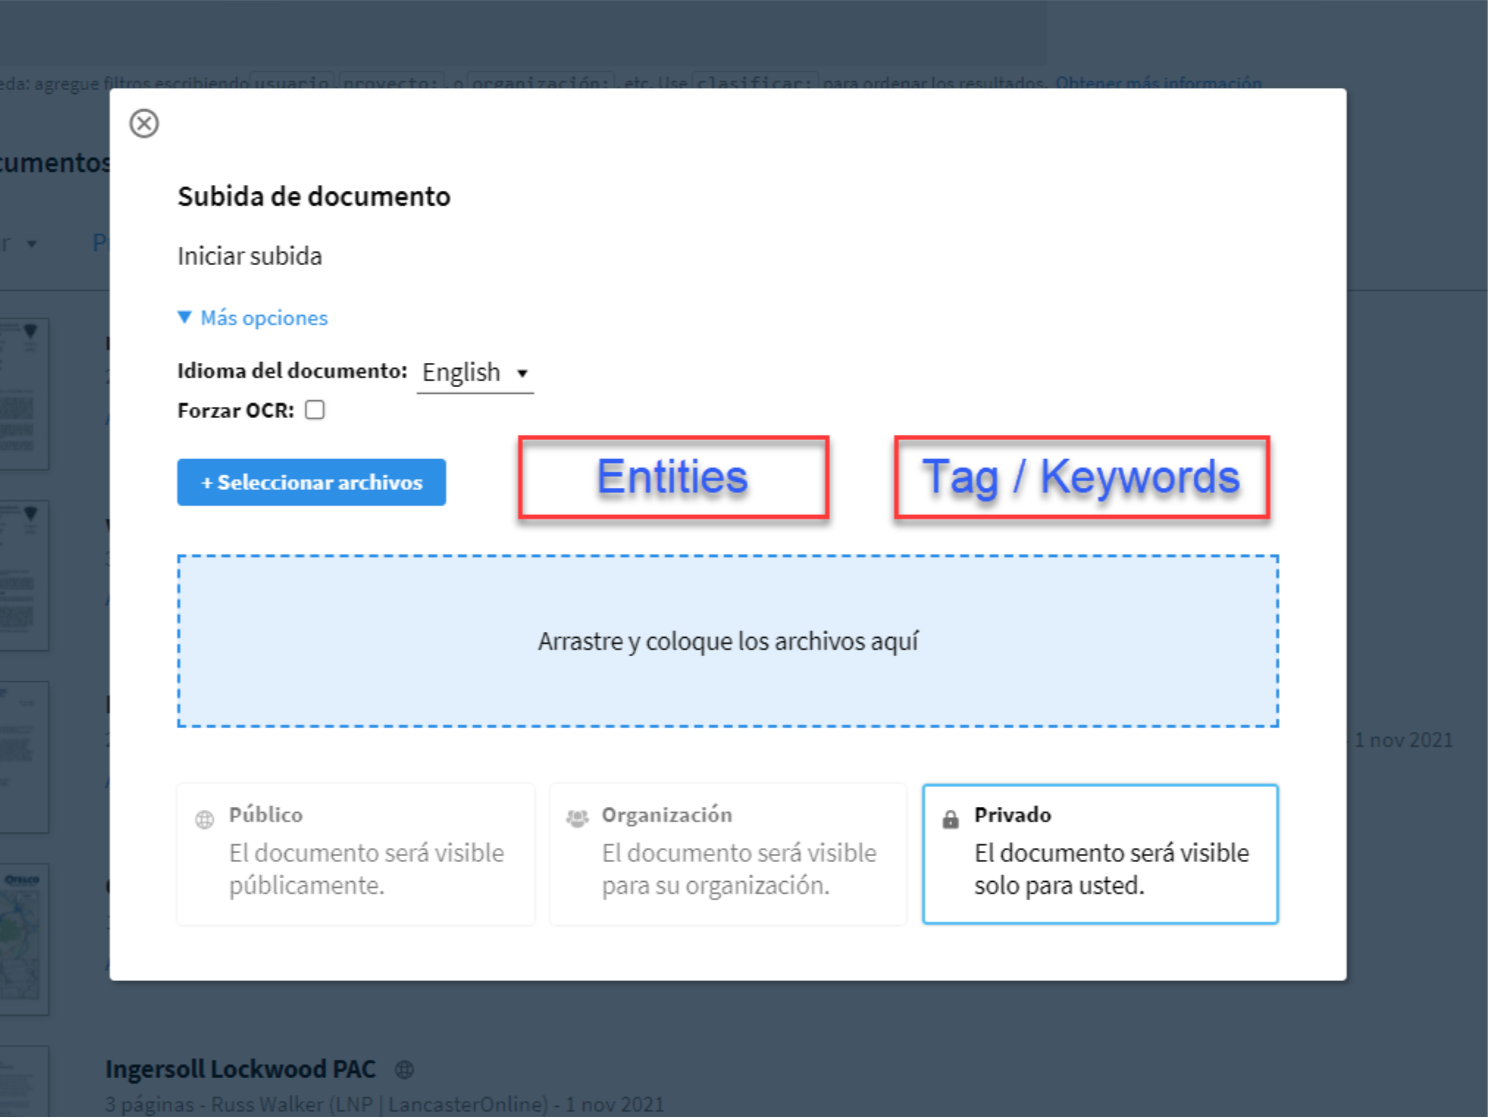 A screenshot showing additional proposed buttons that would let users add tags and entities to documents as they upload them into DocumentCloud